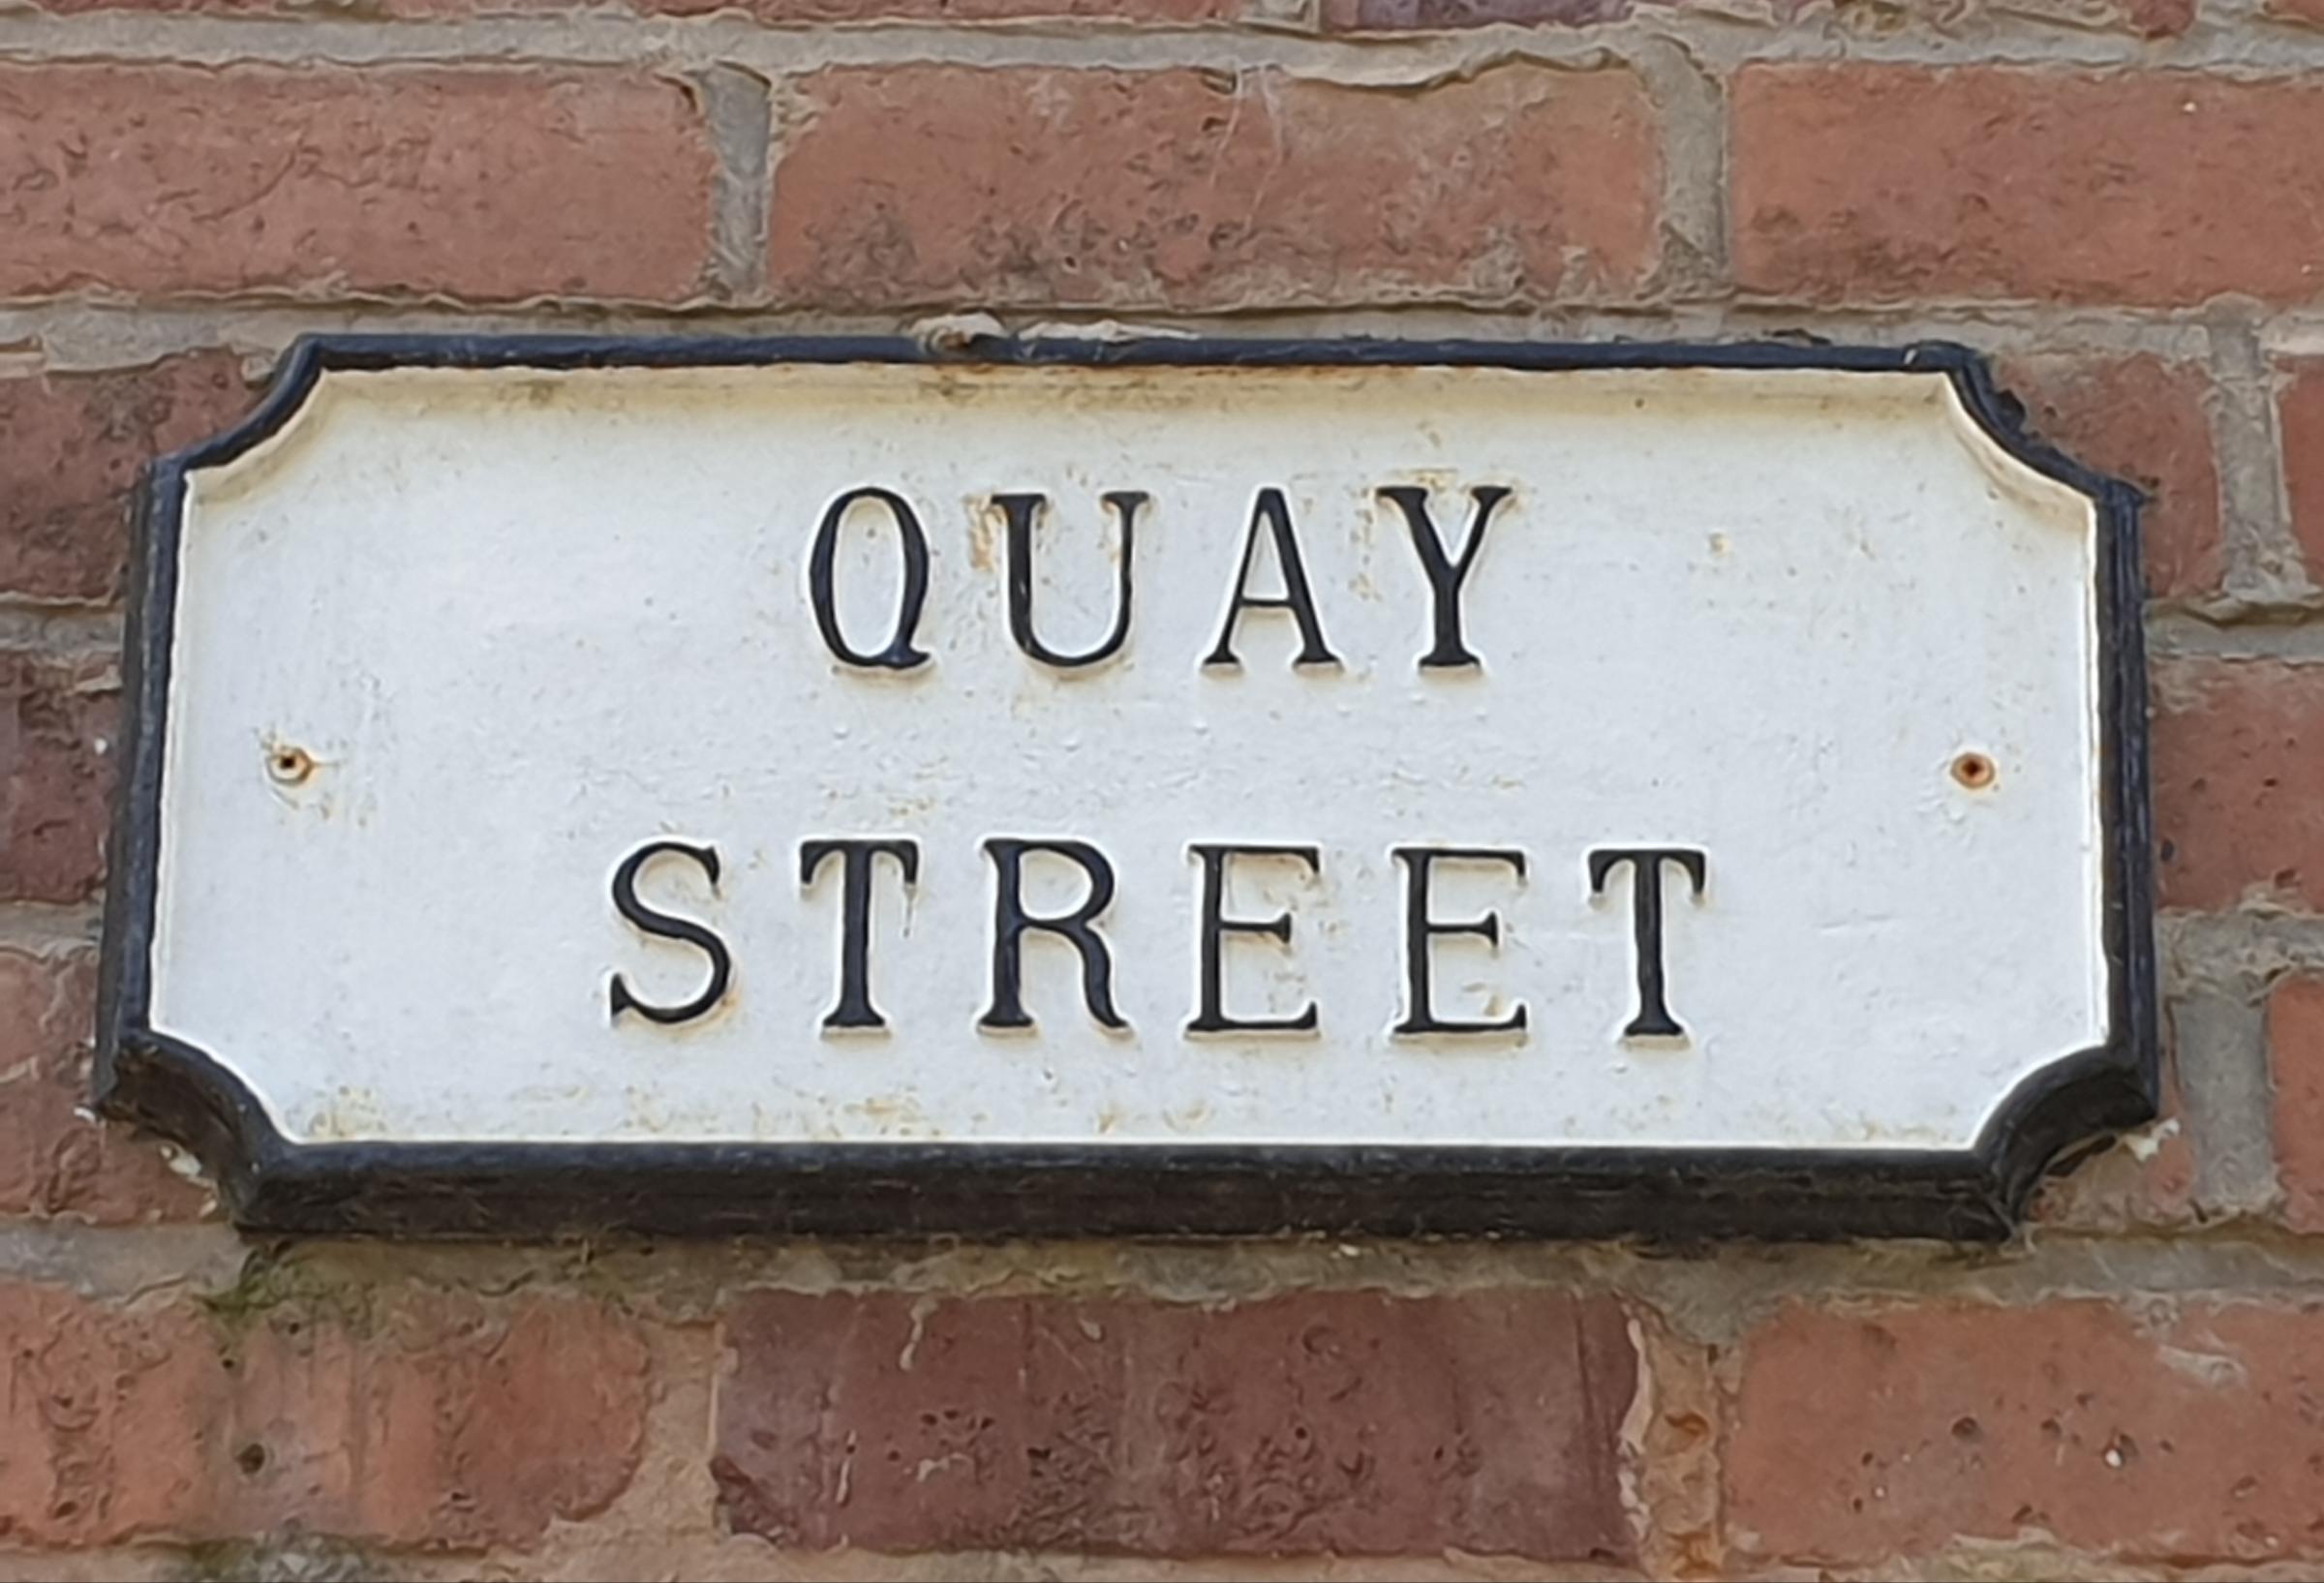 The Quay Street sign is a spruce affair these days